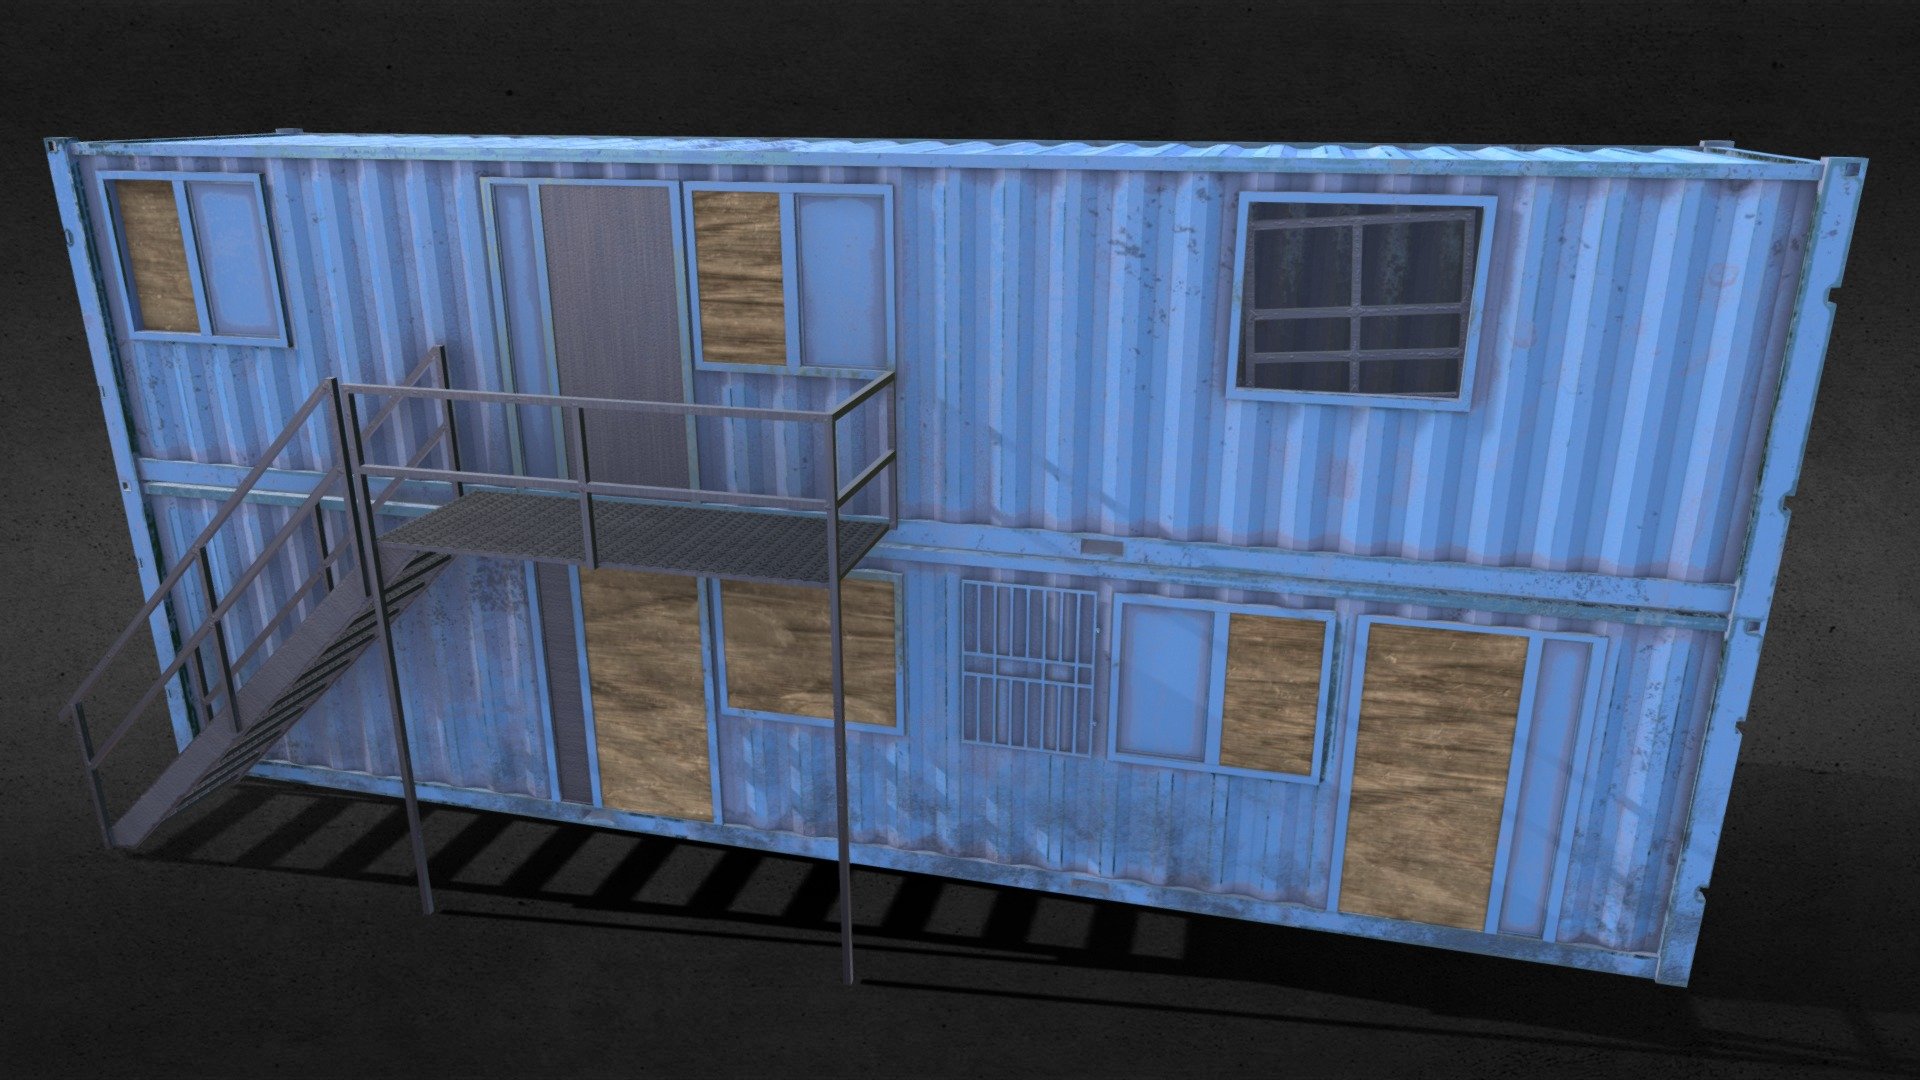 Shipping Container Building - 3D model by mjhathaway 3d model